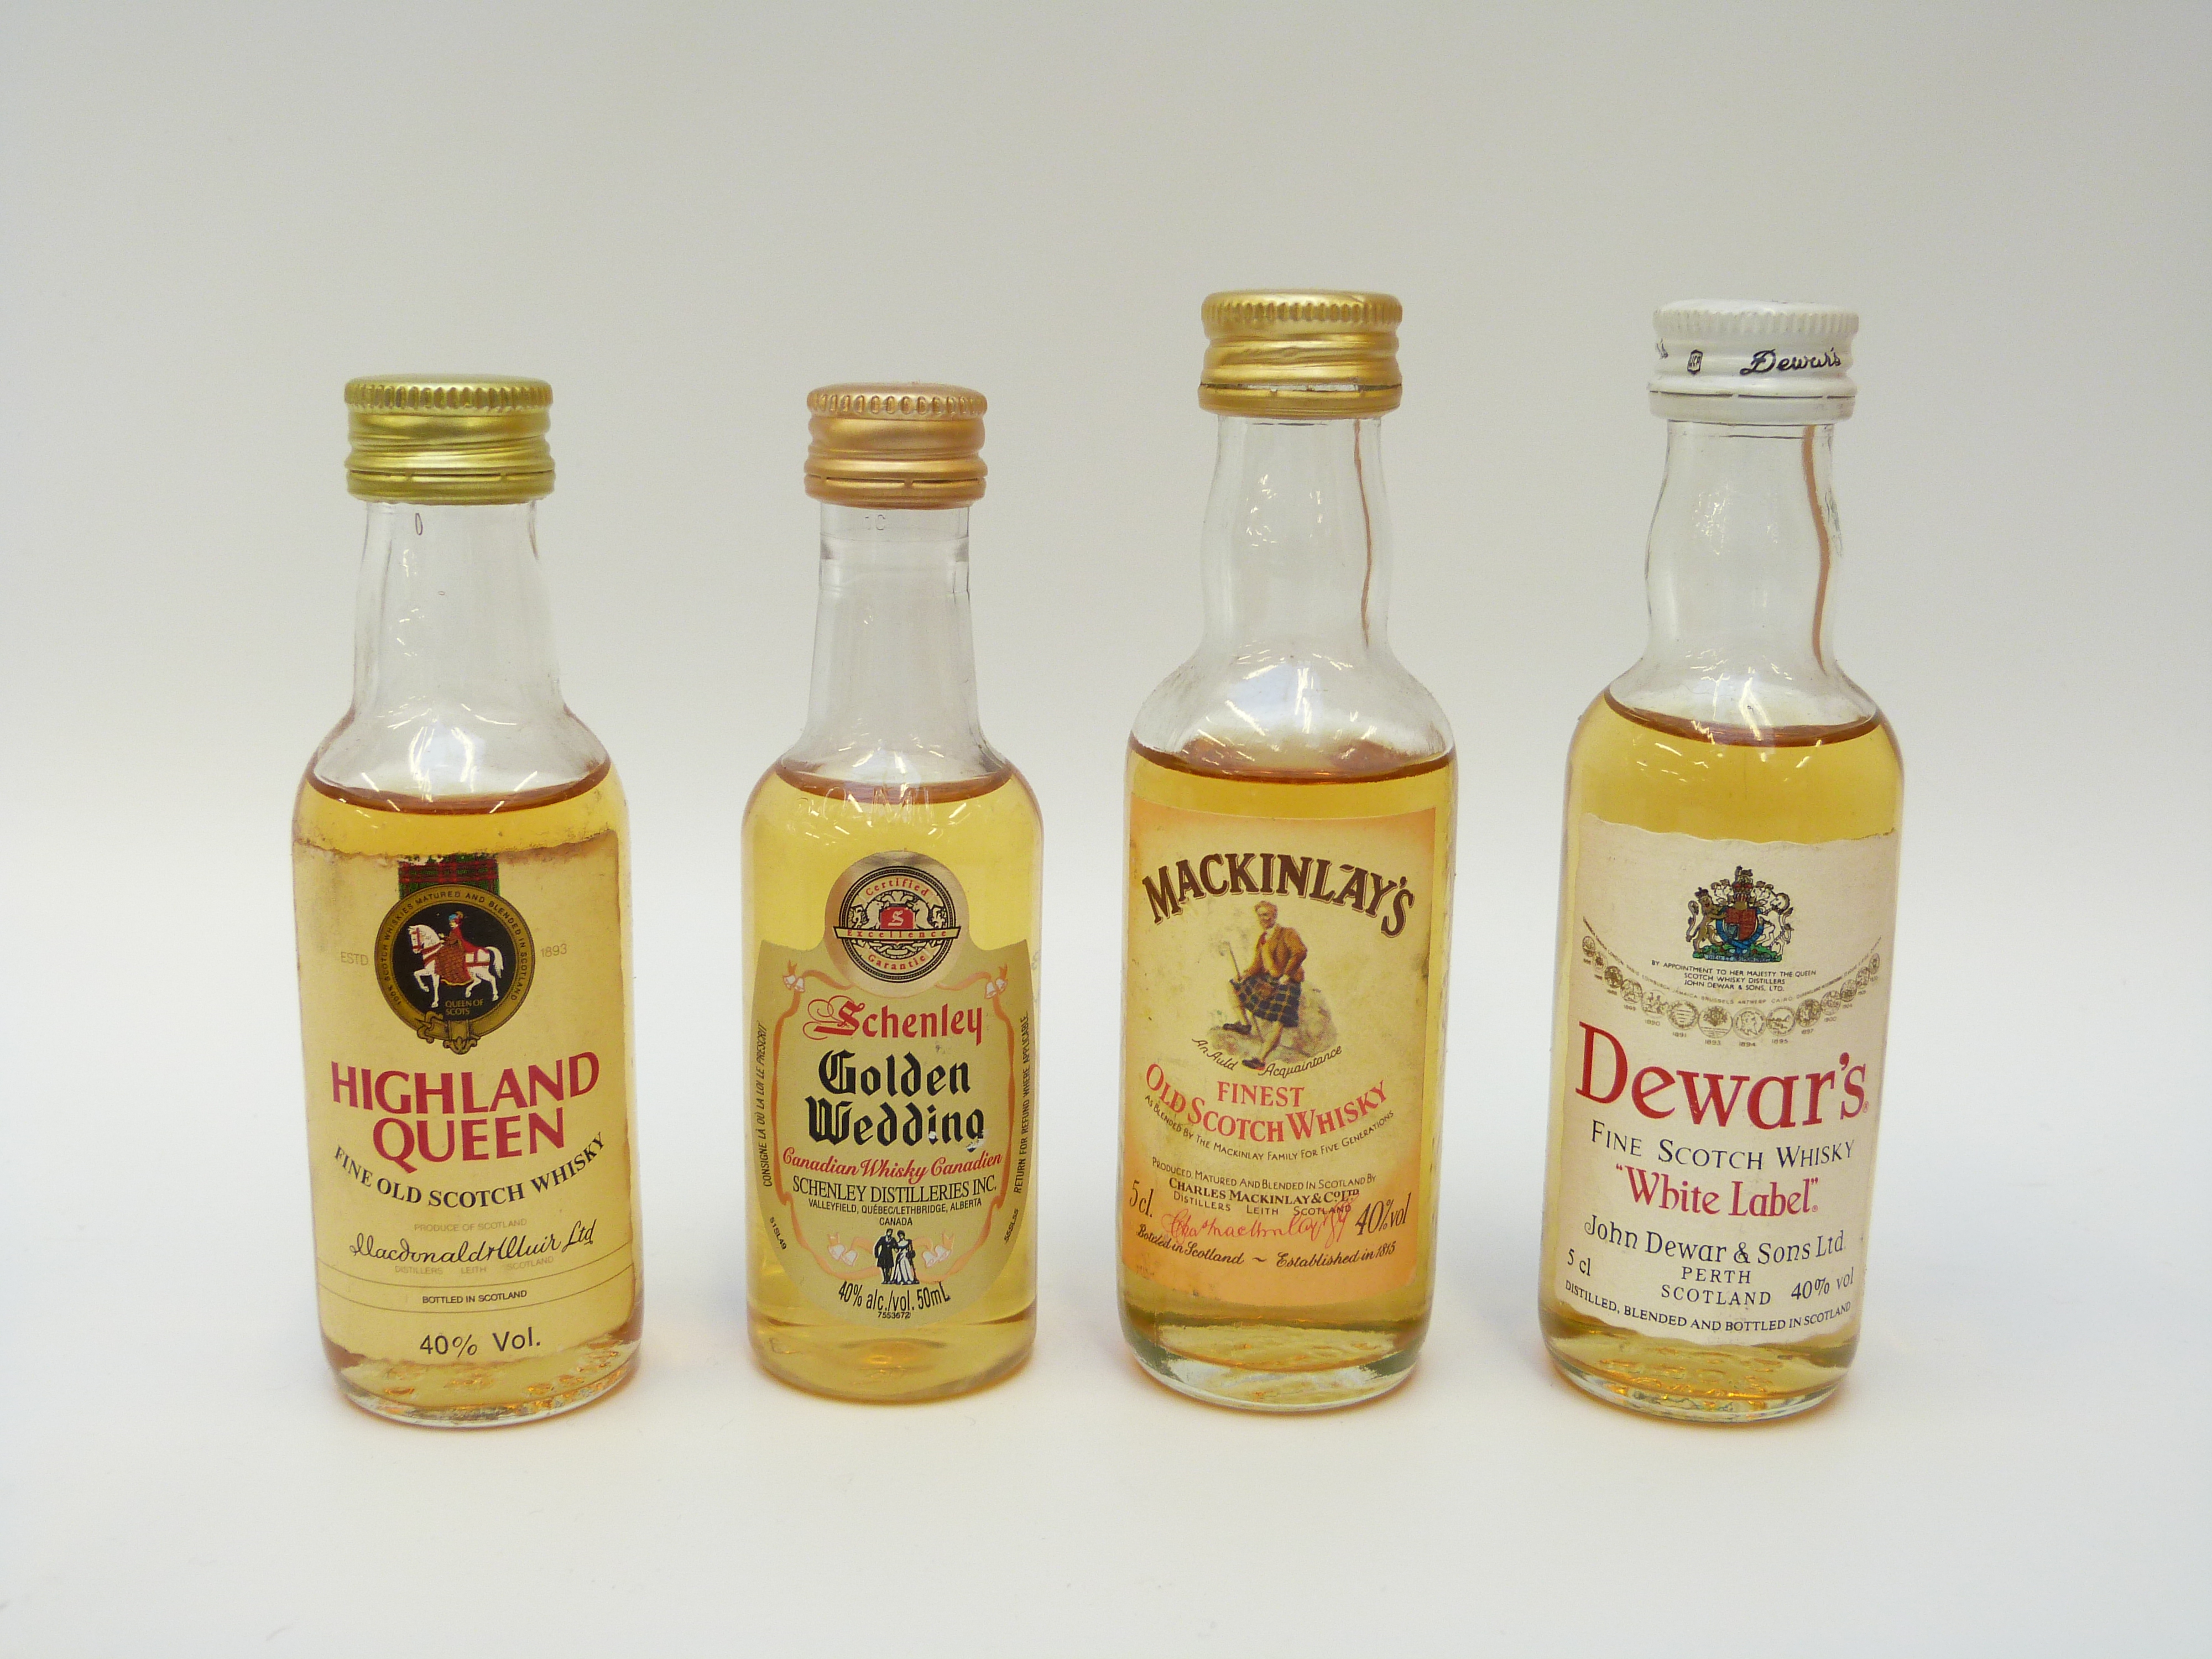 Twenty-two Scotch whisky miniatures including Macleod's 8 year, Dewar's, Dimple, - Image 7 of 8